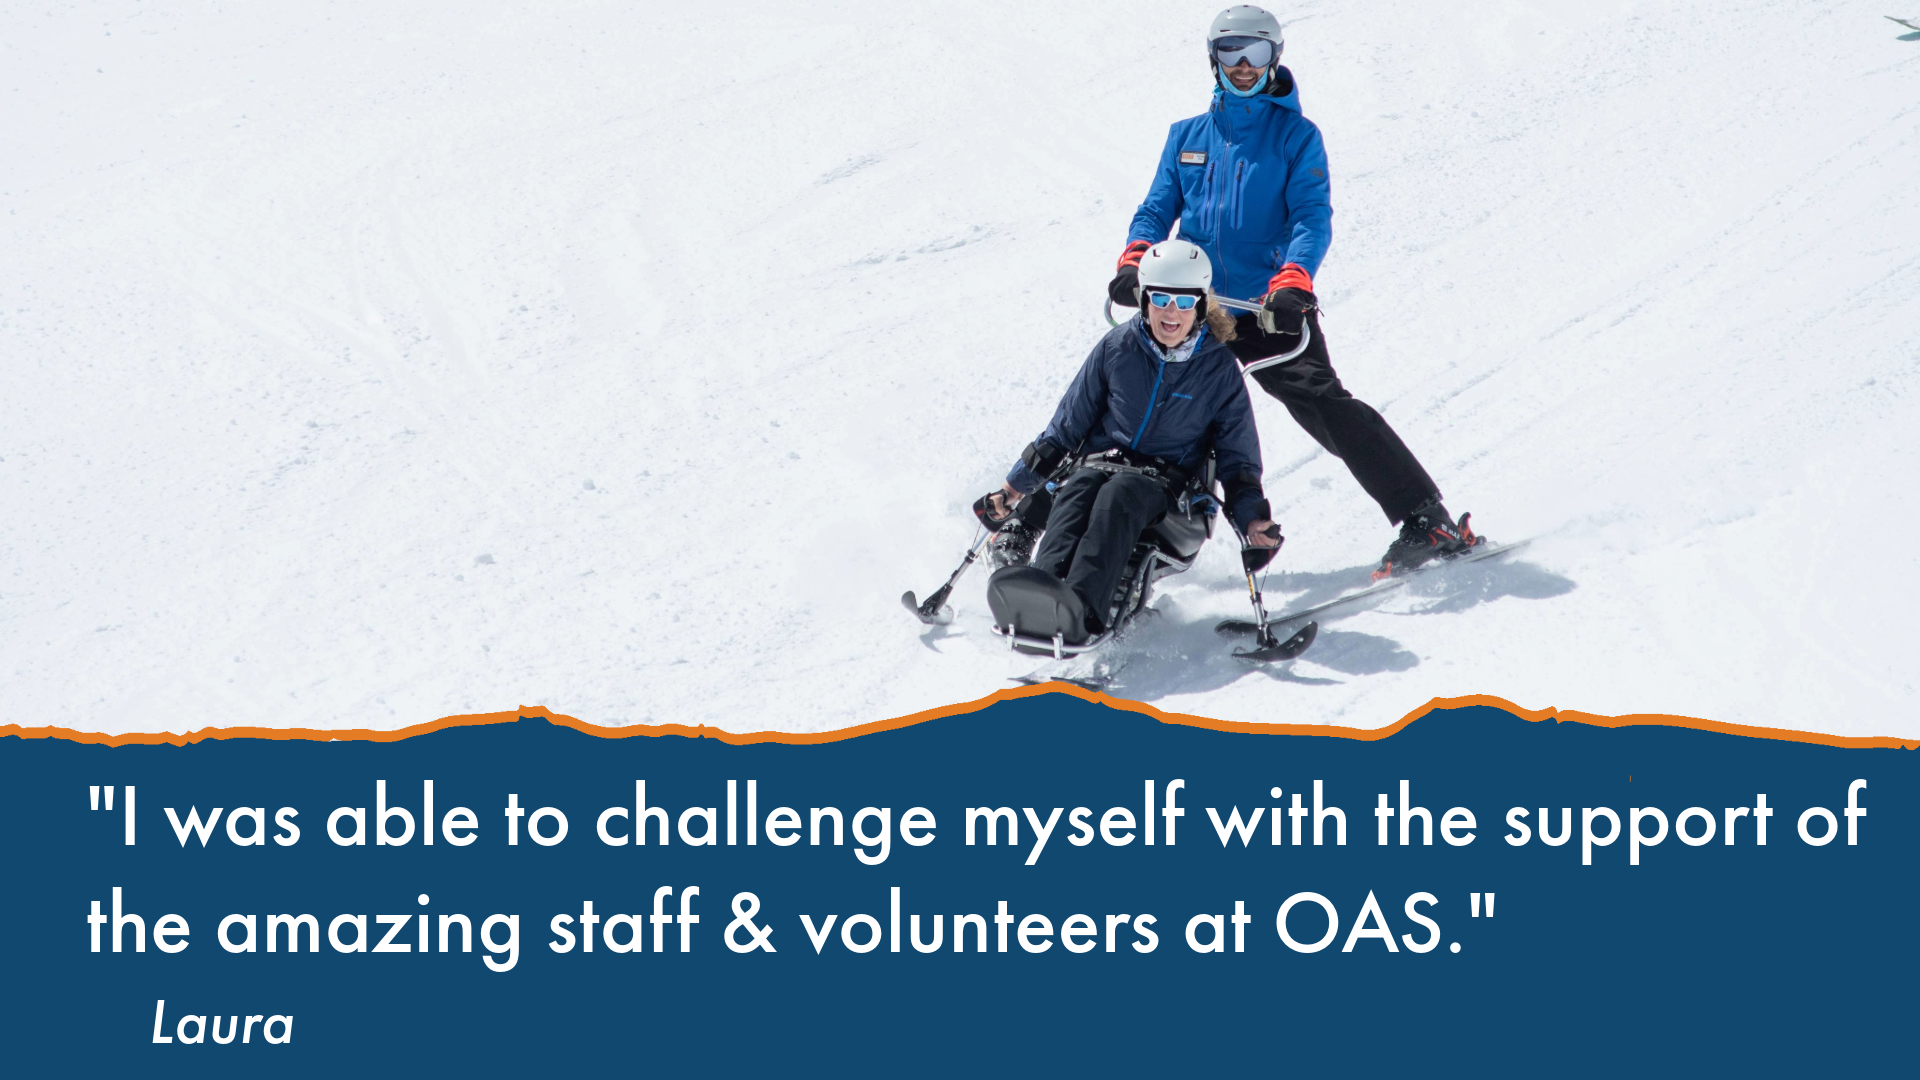 text: "I was able to challenge myself with the support of the amazing staff & volunteers at OAS." Laura is in a sit-ski assisted from behind by an OAS instructor down the slope.